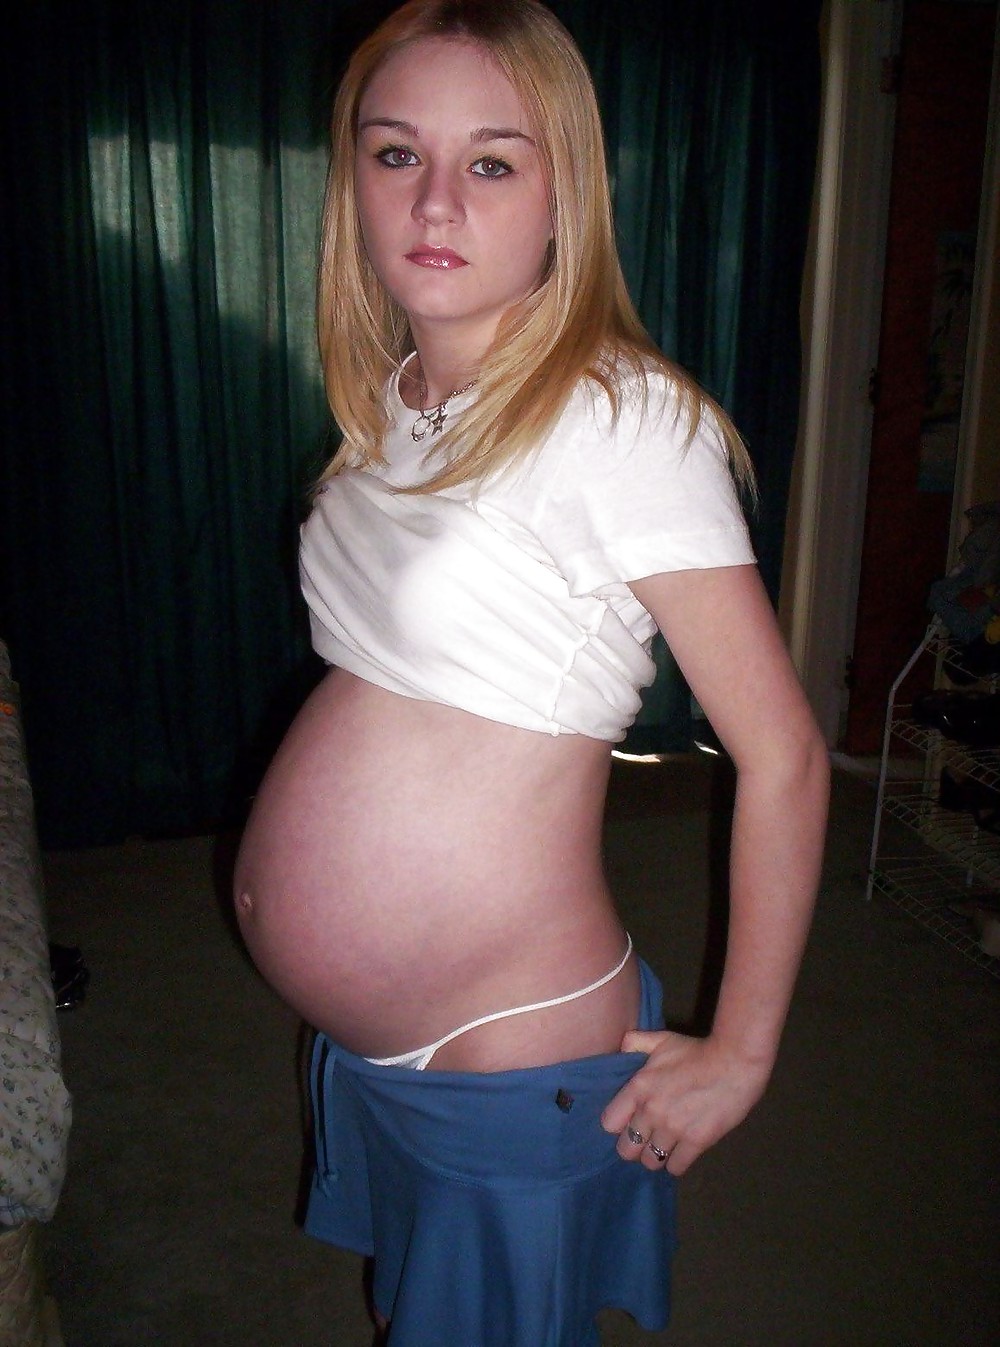 Sexy pregnant girls (showing belly) #21110415